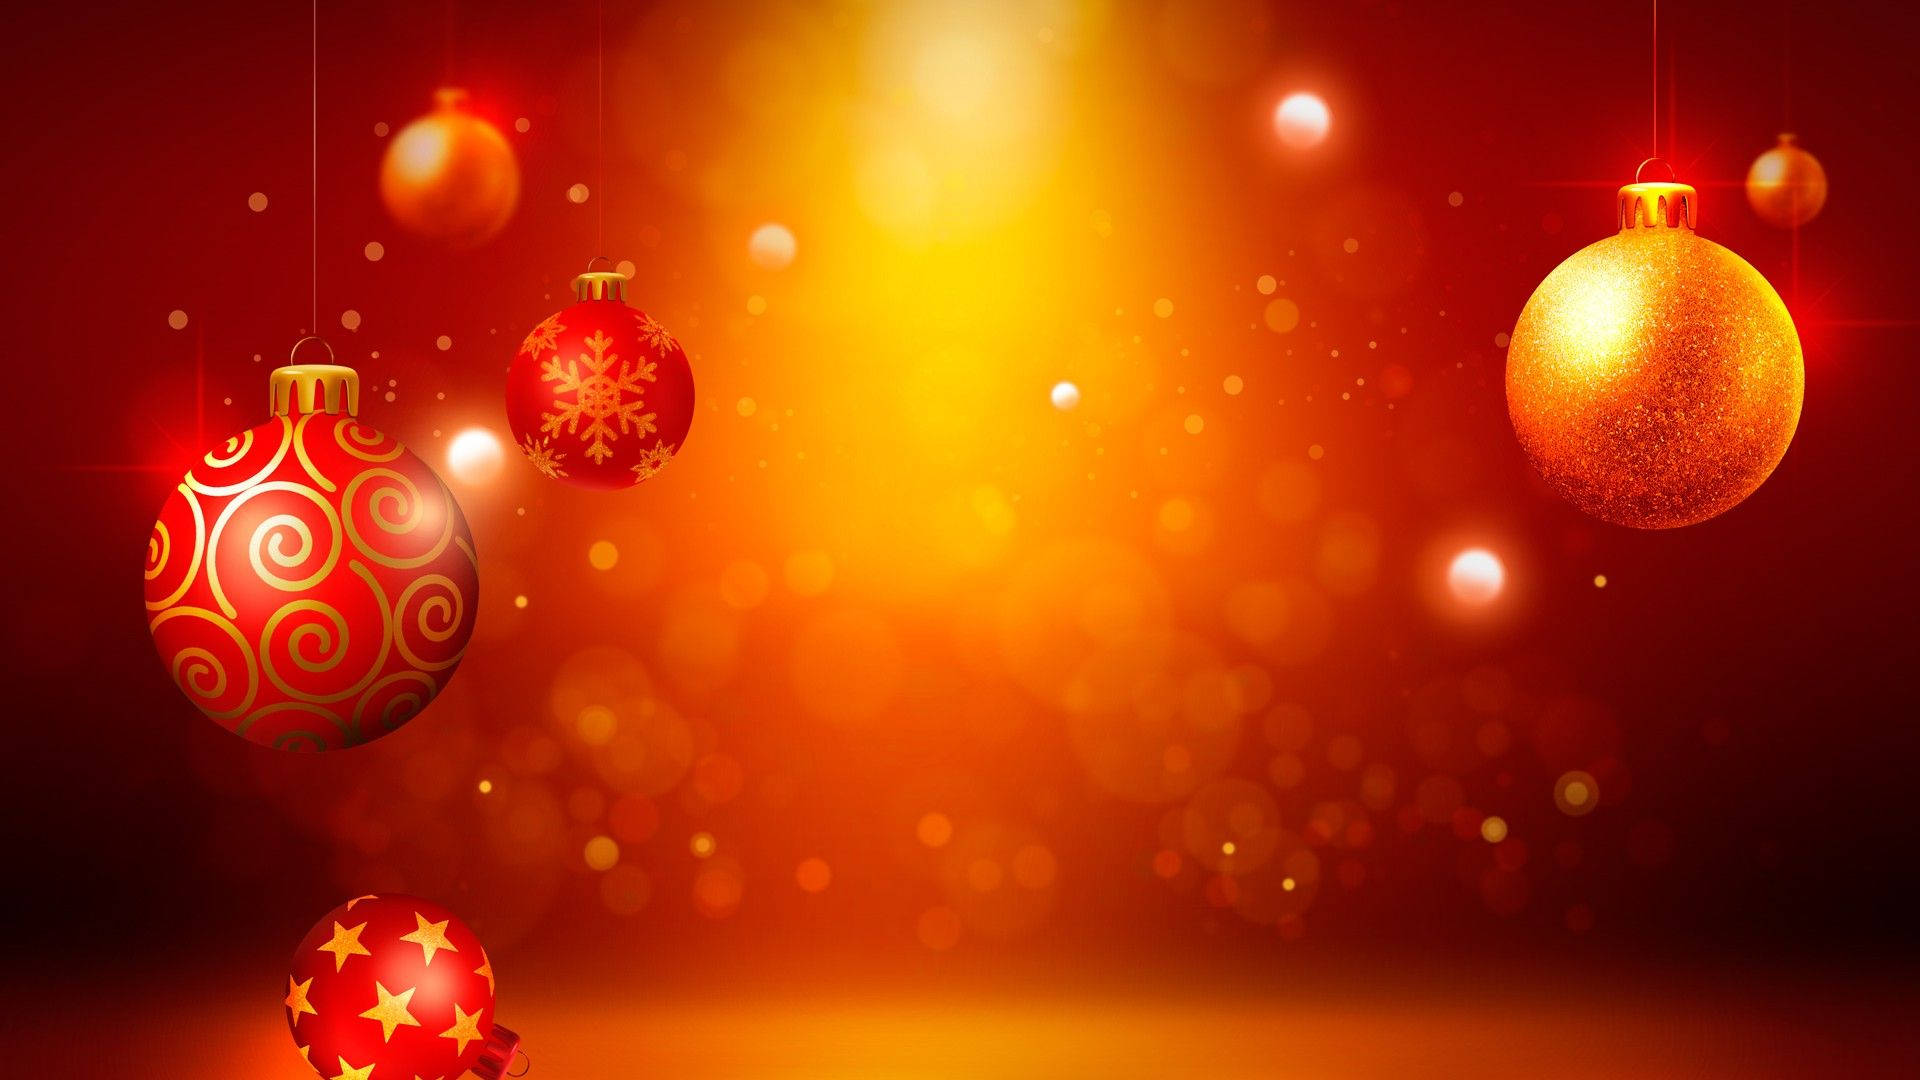 Download Gold And Red Christmas Background Wallpaper